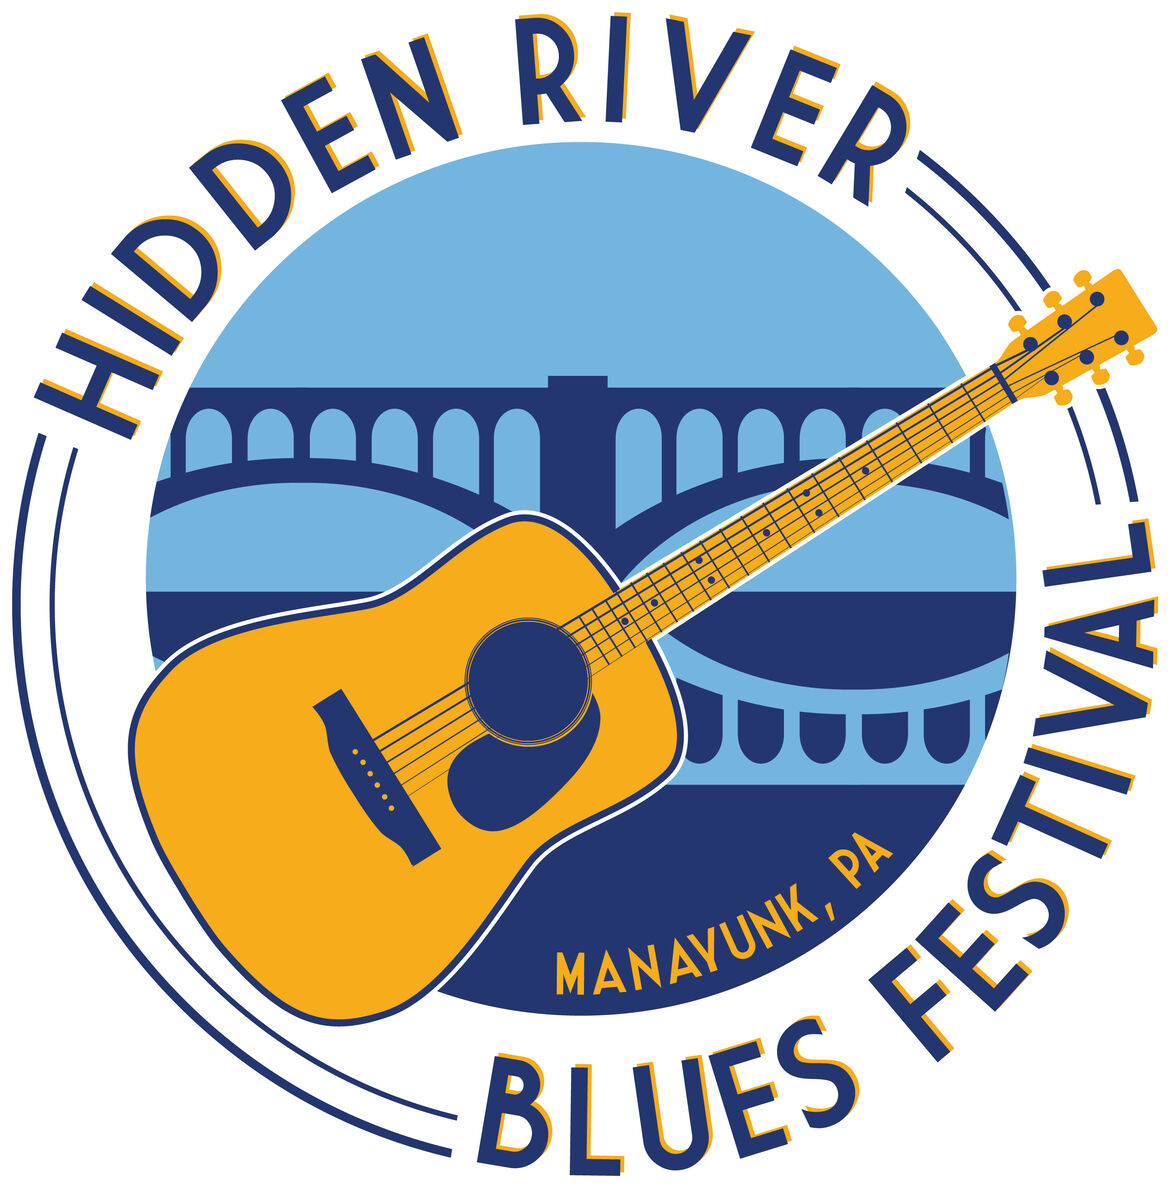 Everything You Need To Know About The Hidden River Blues Festival Manayunk